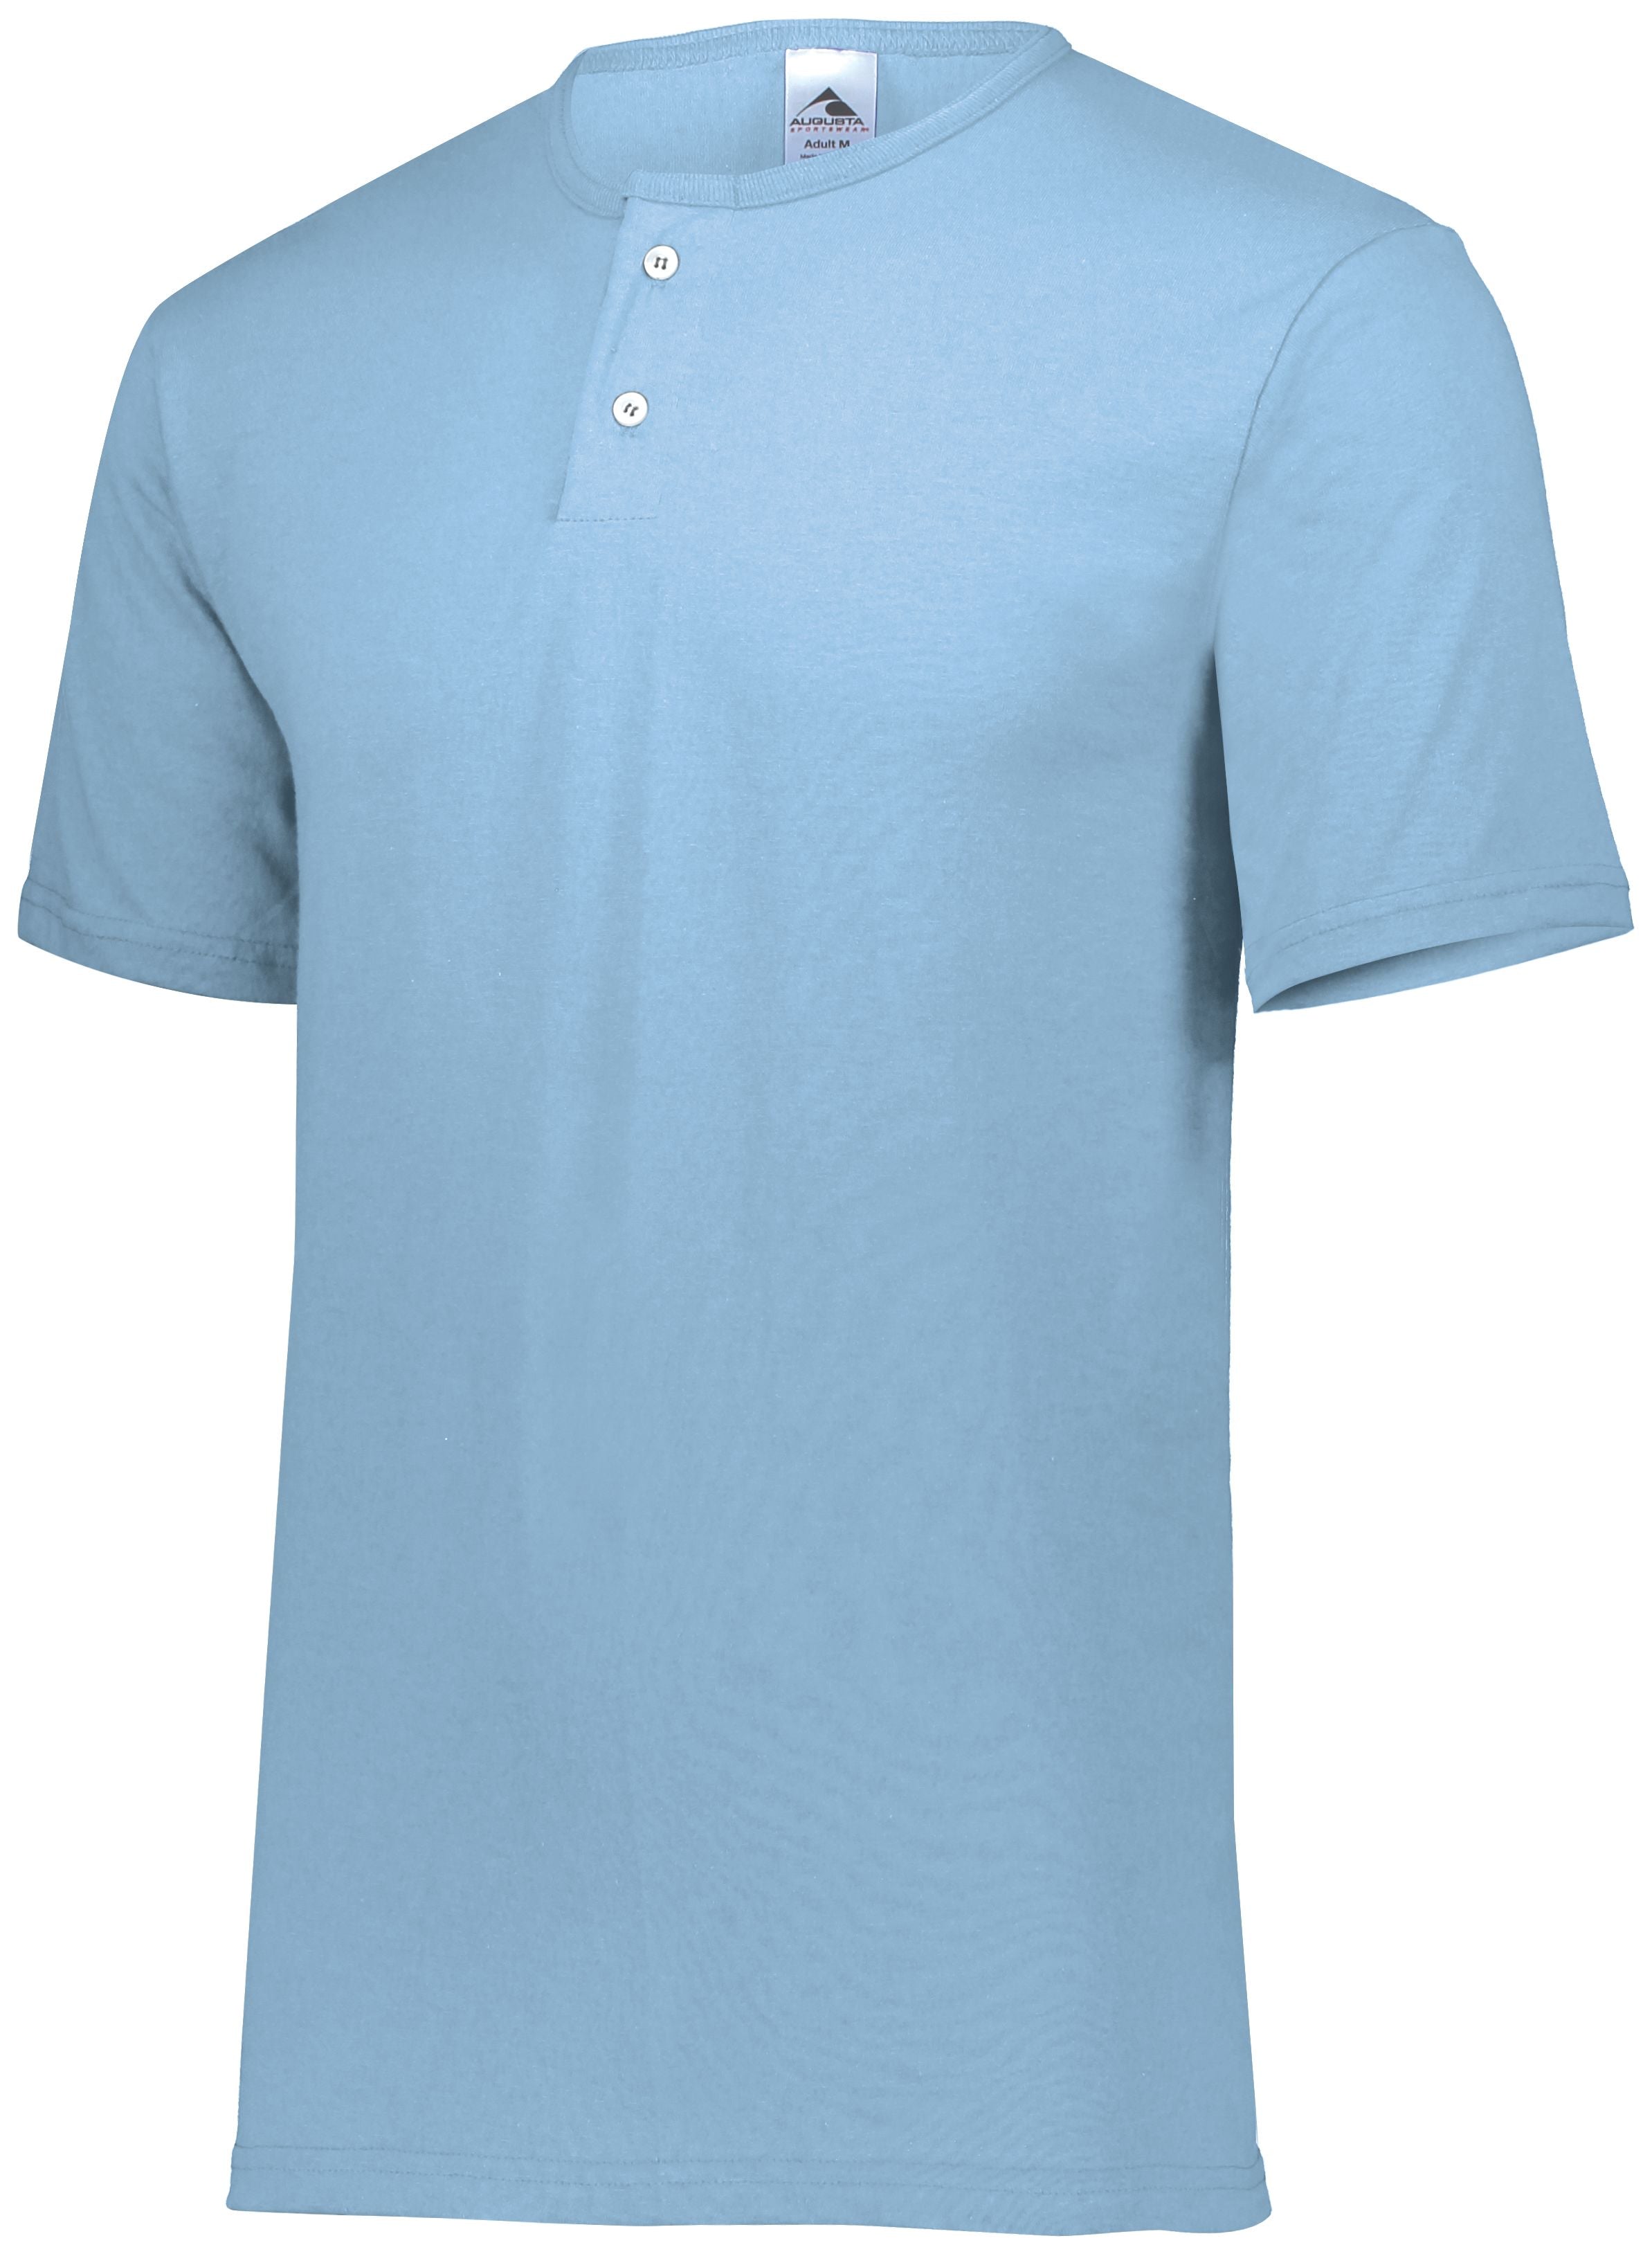 Augusta Sportswear Youth Two-Button Baseball Jersey in Light Blue  -Part of the Youth, Youth-Jersey, Augusta-Products, Baseball, Shirts, All-Sports, All-Sports-1 product lines at KanaleyCreations.com